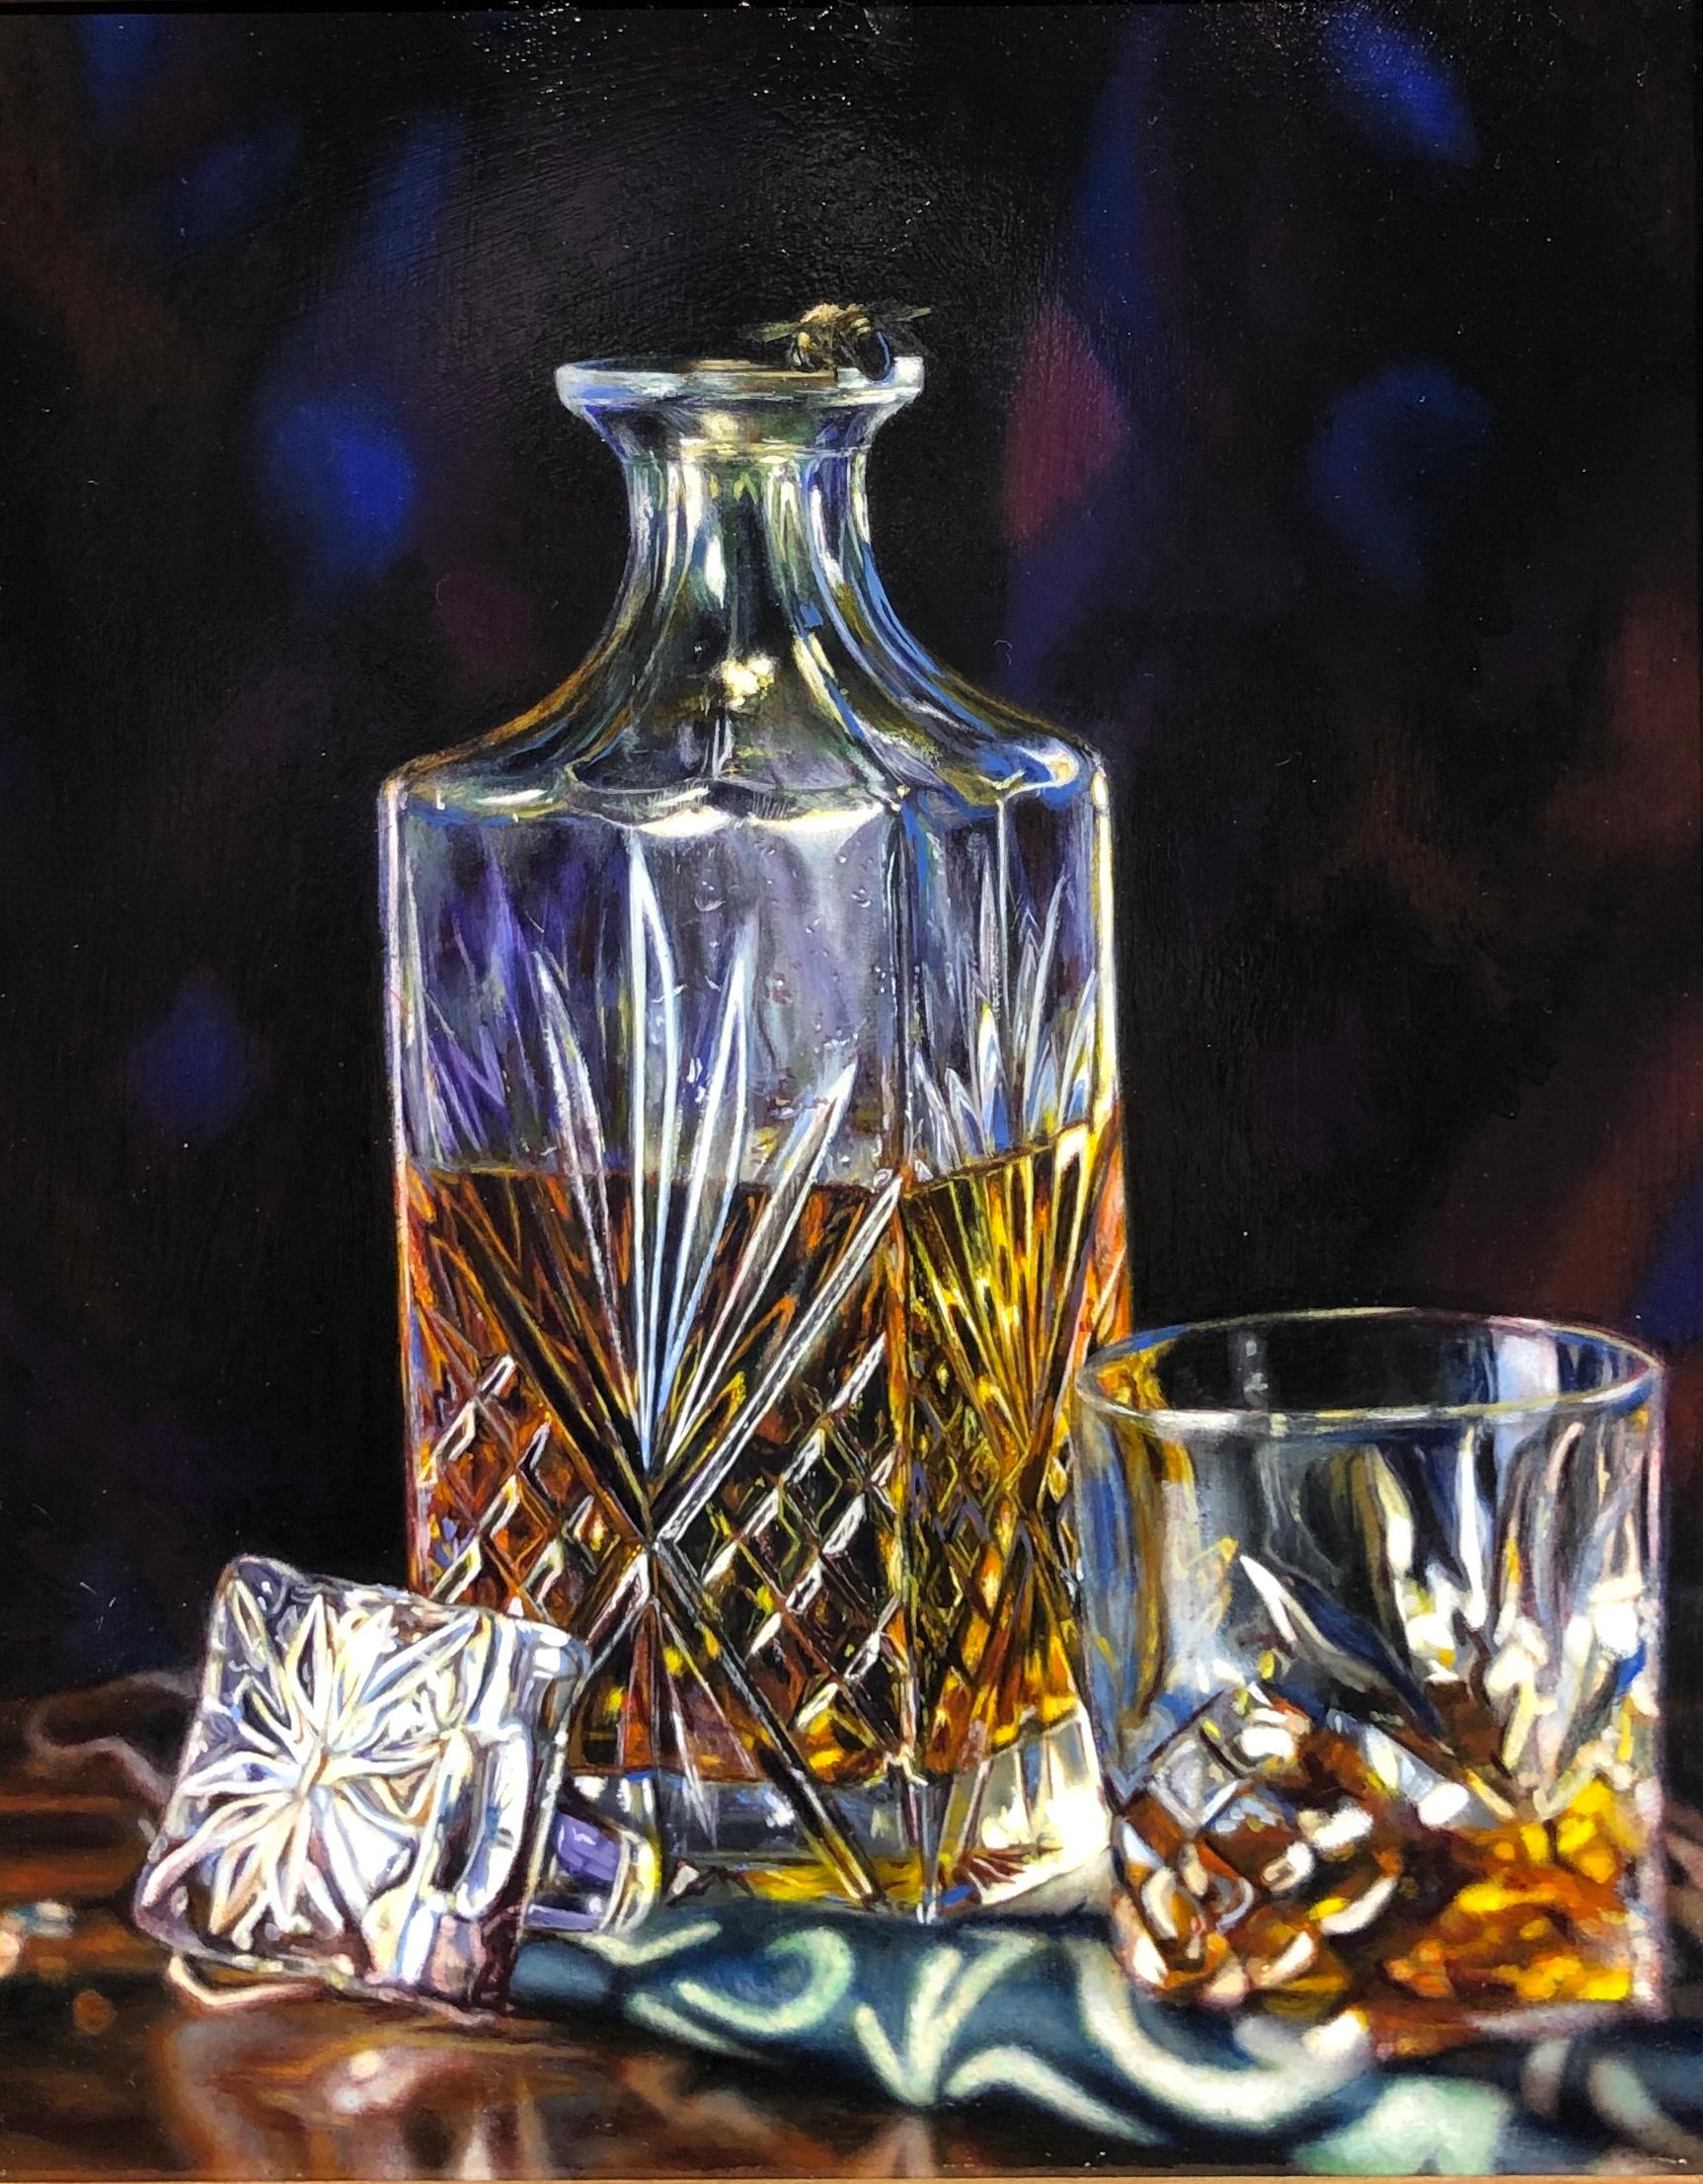 The Misunderstanding - Still Life with Honey Bee on Edge of Crystal Decanter